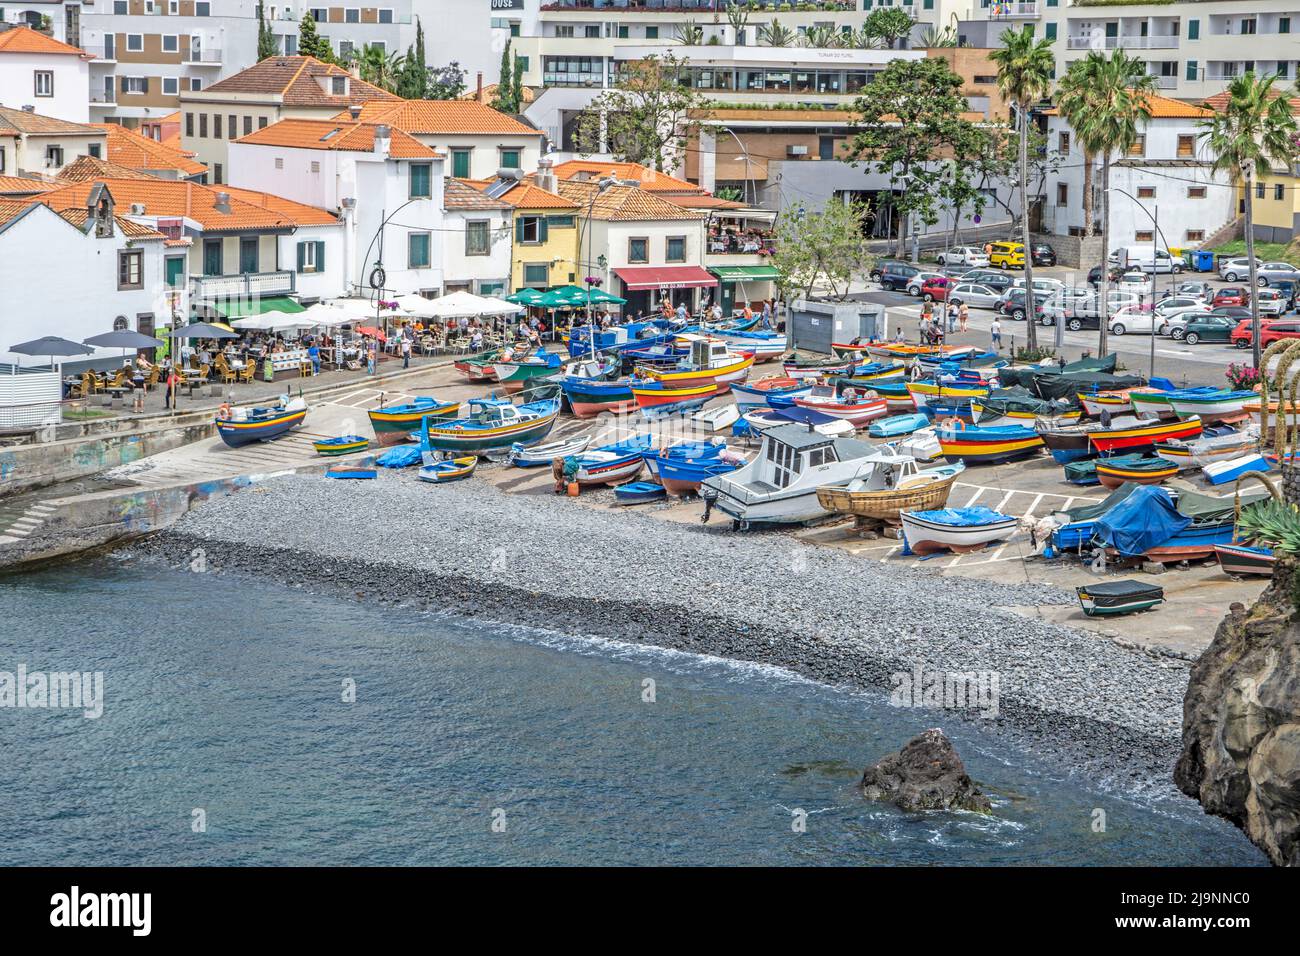 The port area of Camara de Lobos in Madeira. A small fishing port with a number of seaside restaurants. Stock Photo